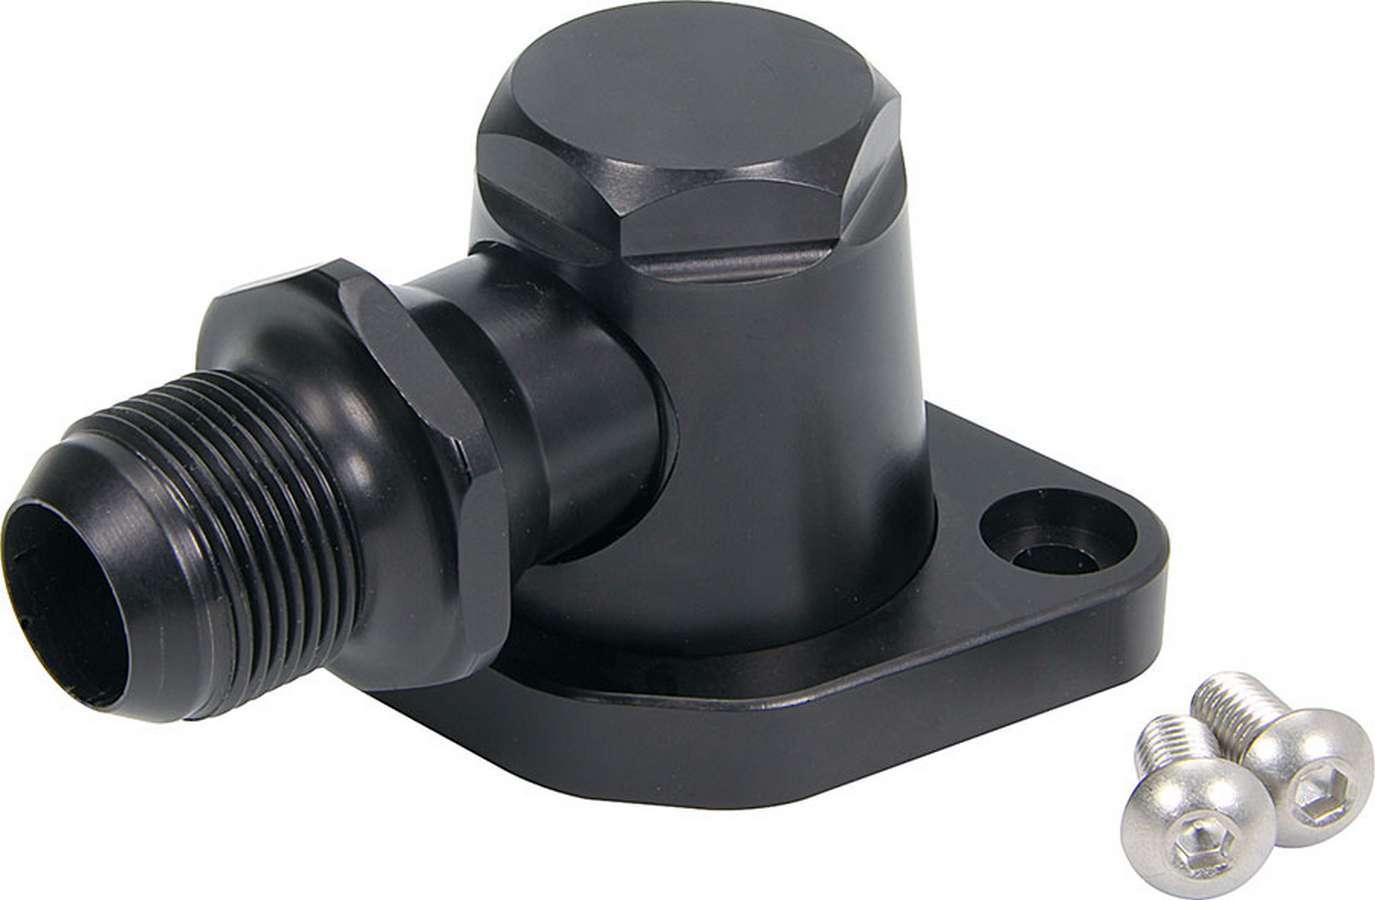 Allstar Performance 30372 Water Neck, 90 Degree, 16 AN Male Inlet, Swivel, O-Ring, Hardware Included, Billet Aluminum, Black Anodized, Chevy V8, Each